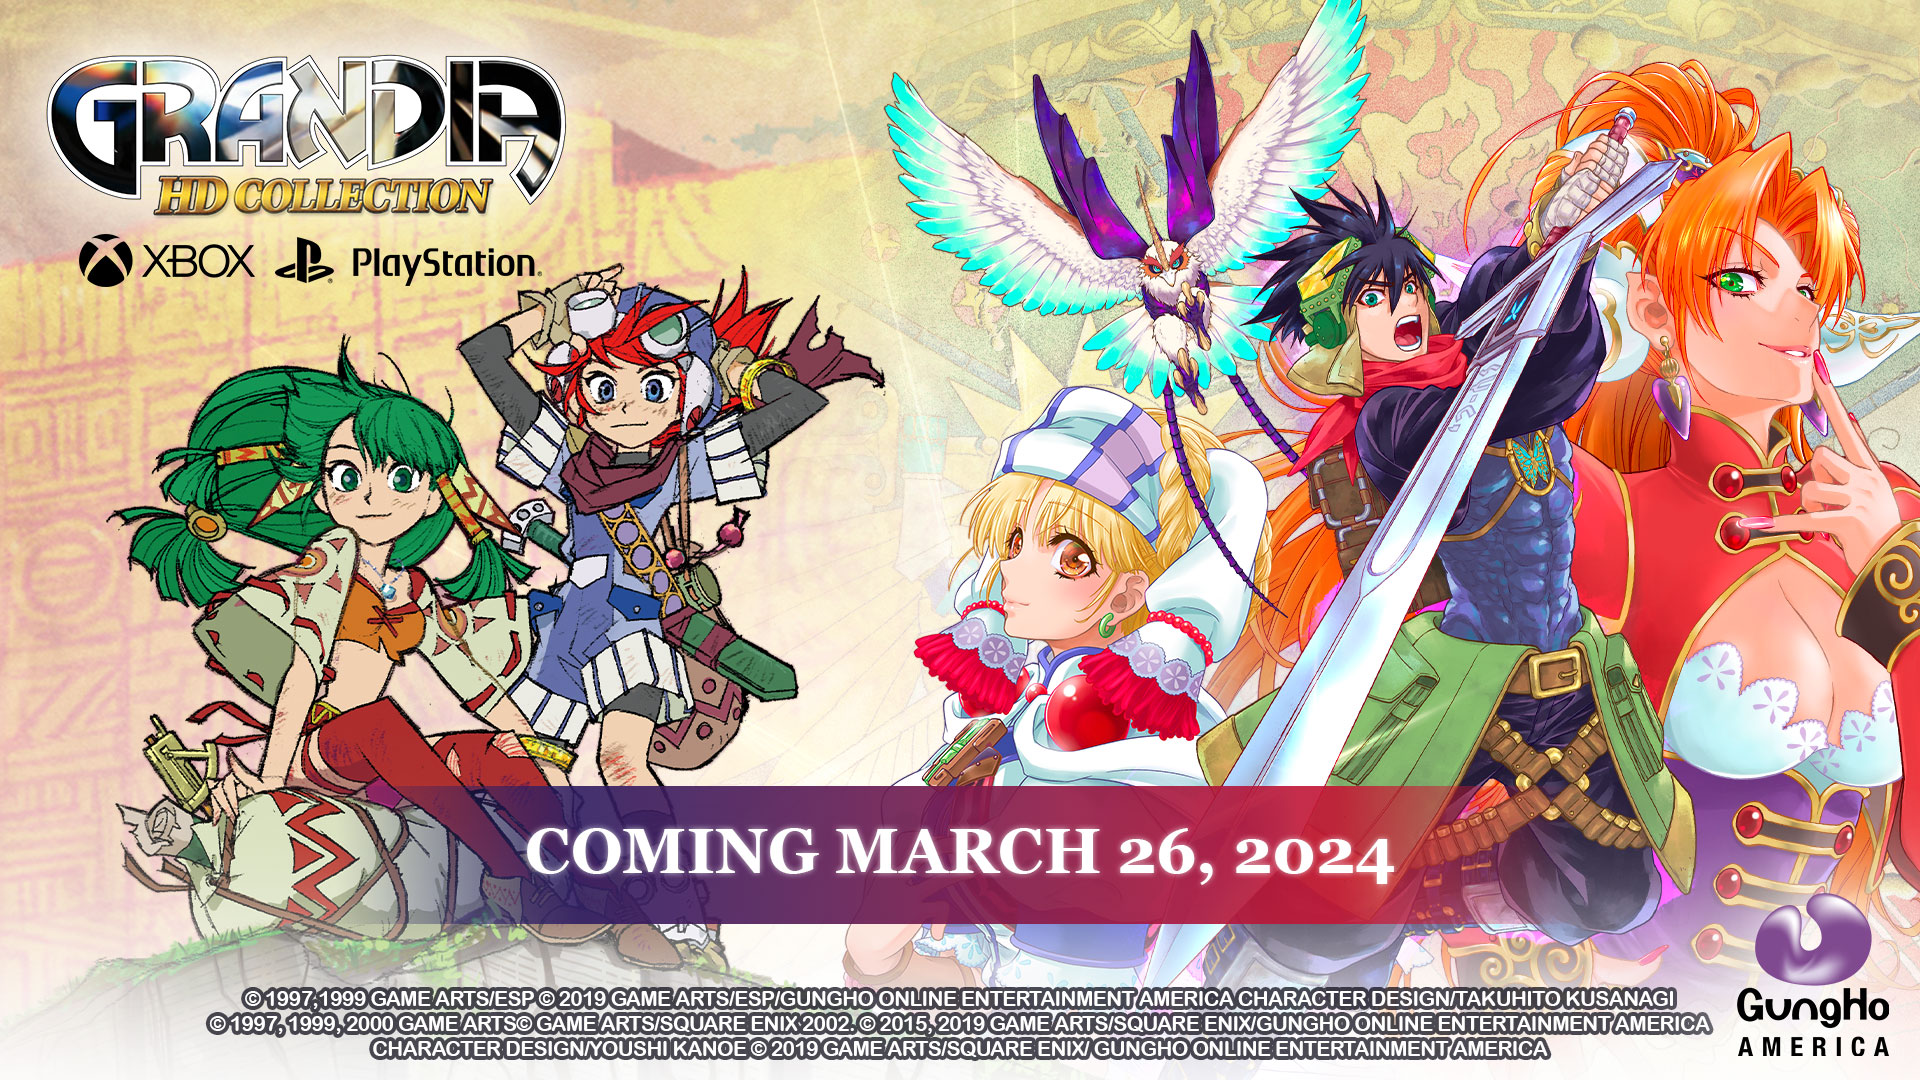 Grandia HD Collection launches March 26, 2024